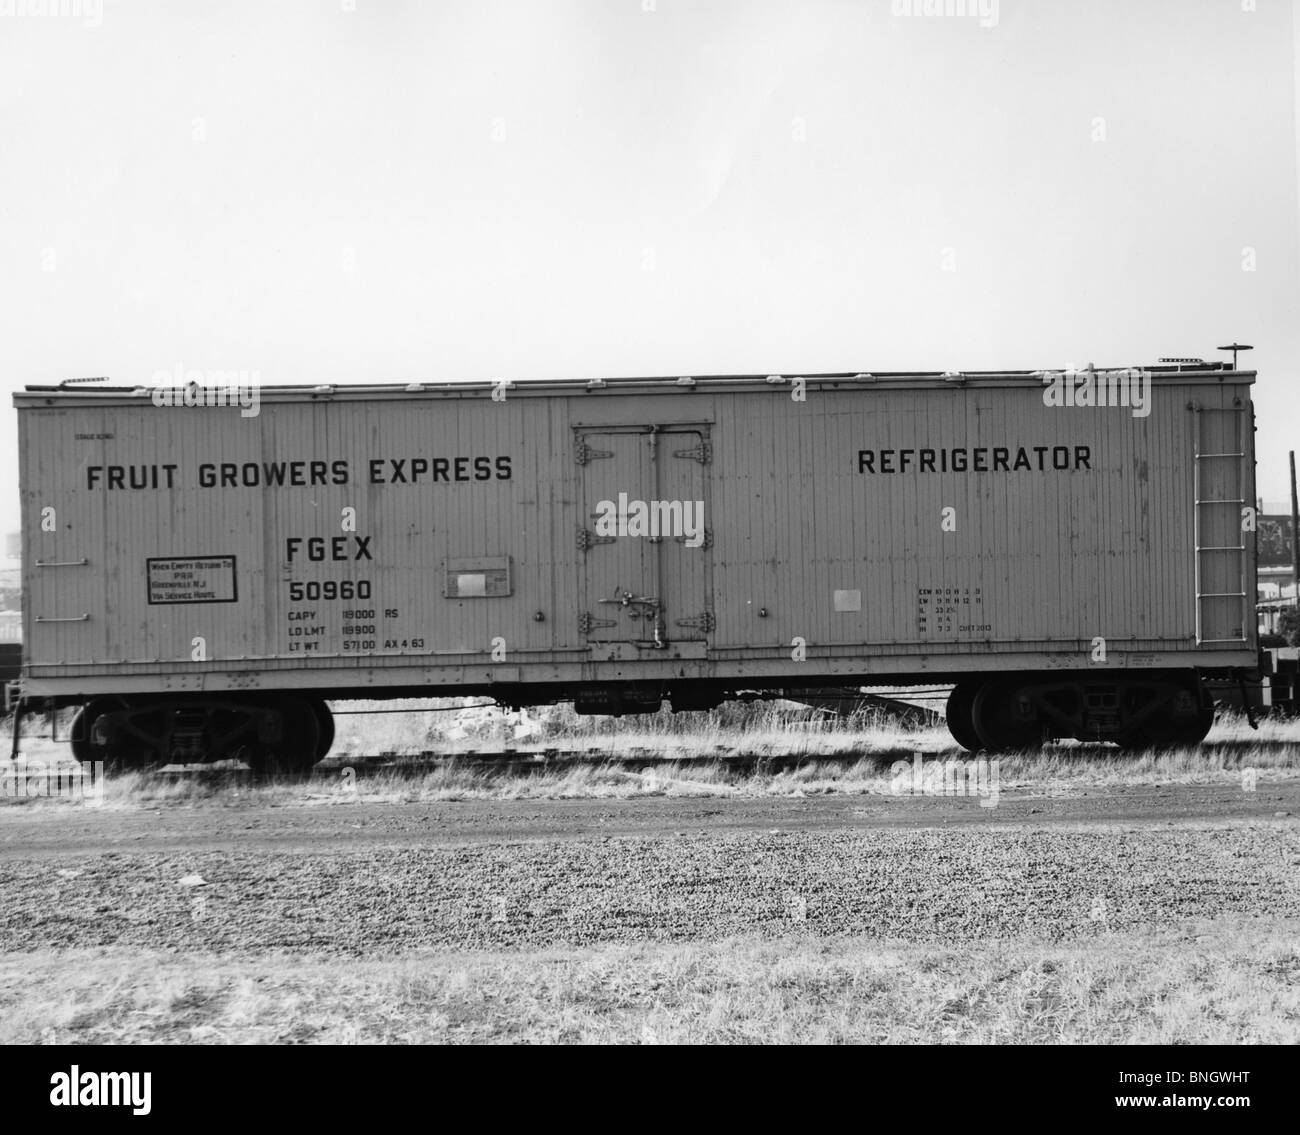 USA, text on a refrigerated freight train Stock Photo